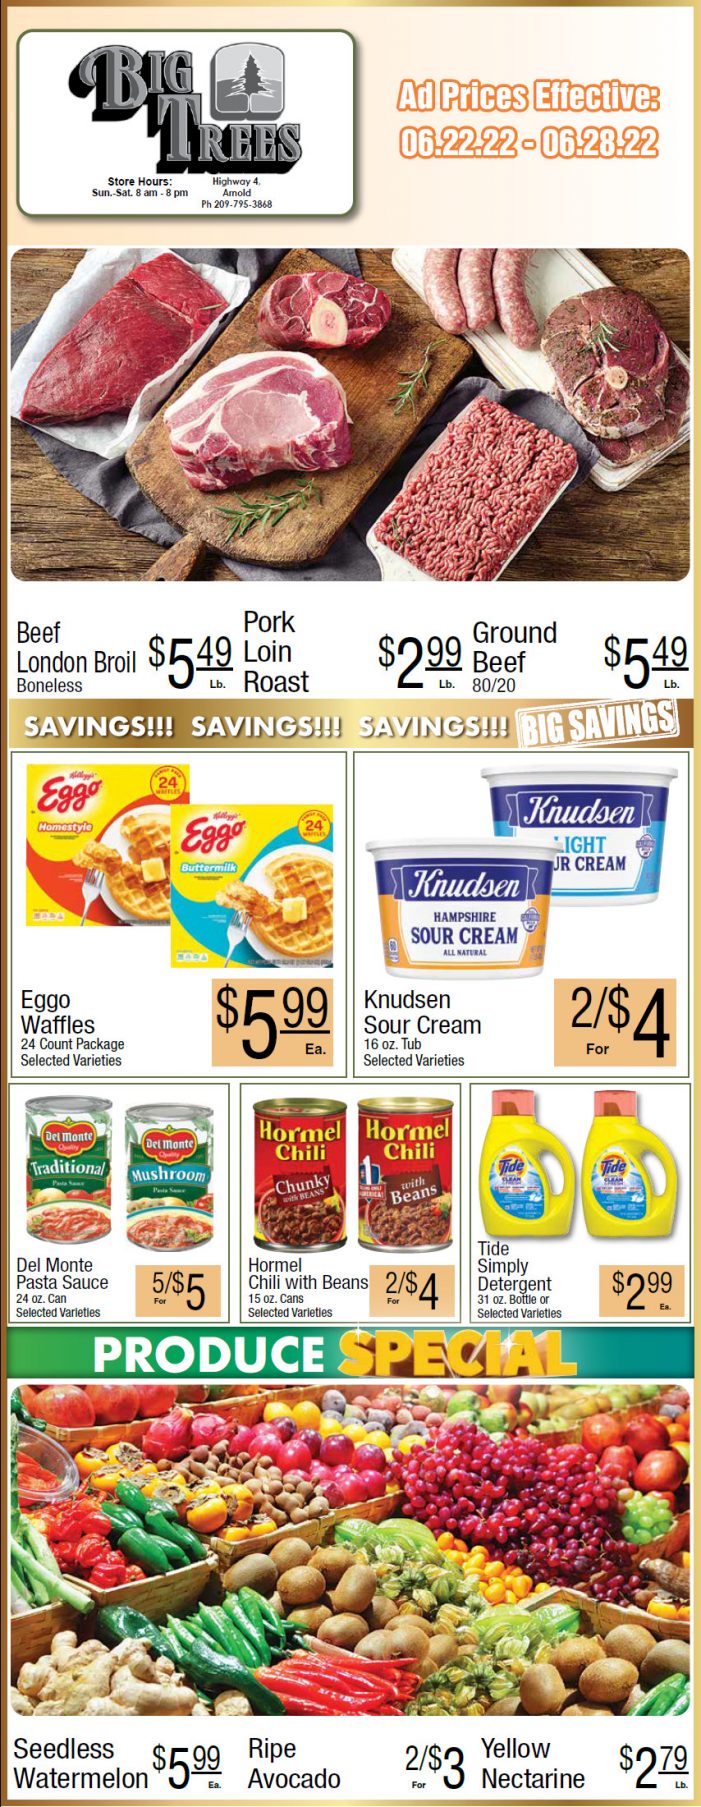 Big Trees Market Weekly Ad & Grocery Specials June 22 – 28!  Shop Local & Save for Summer!!